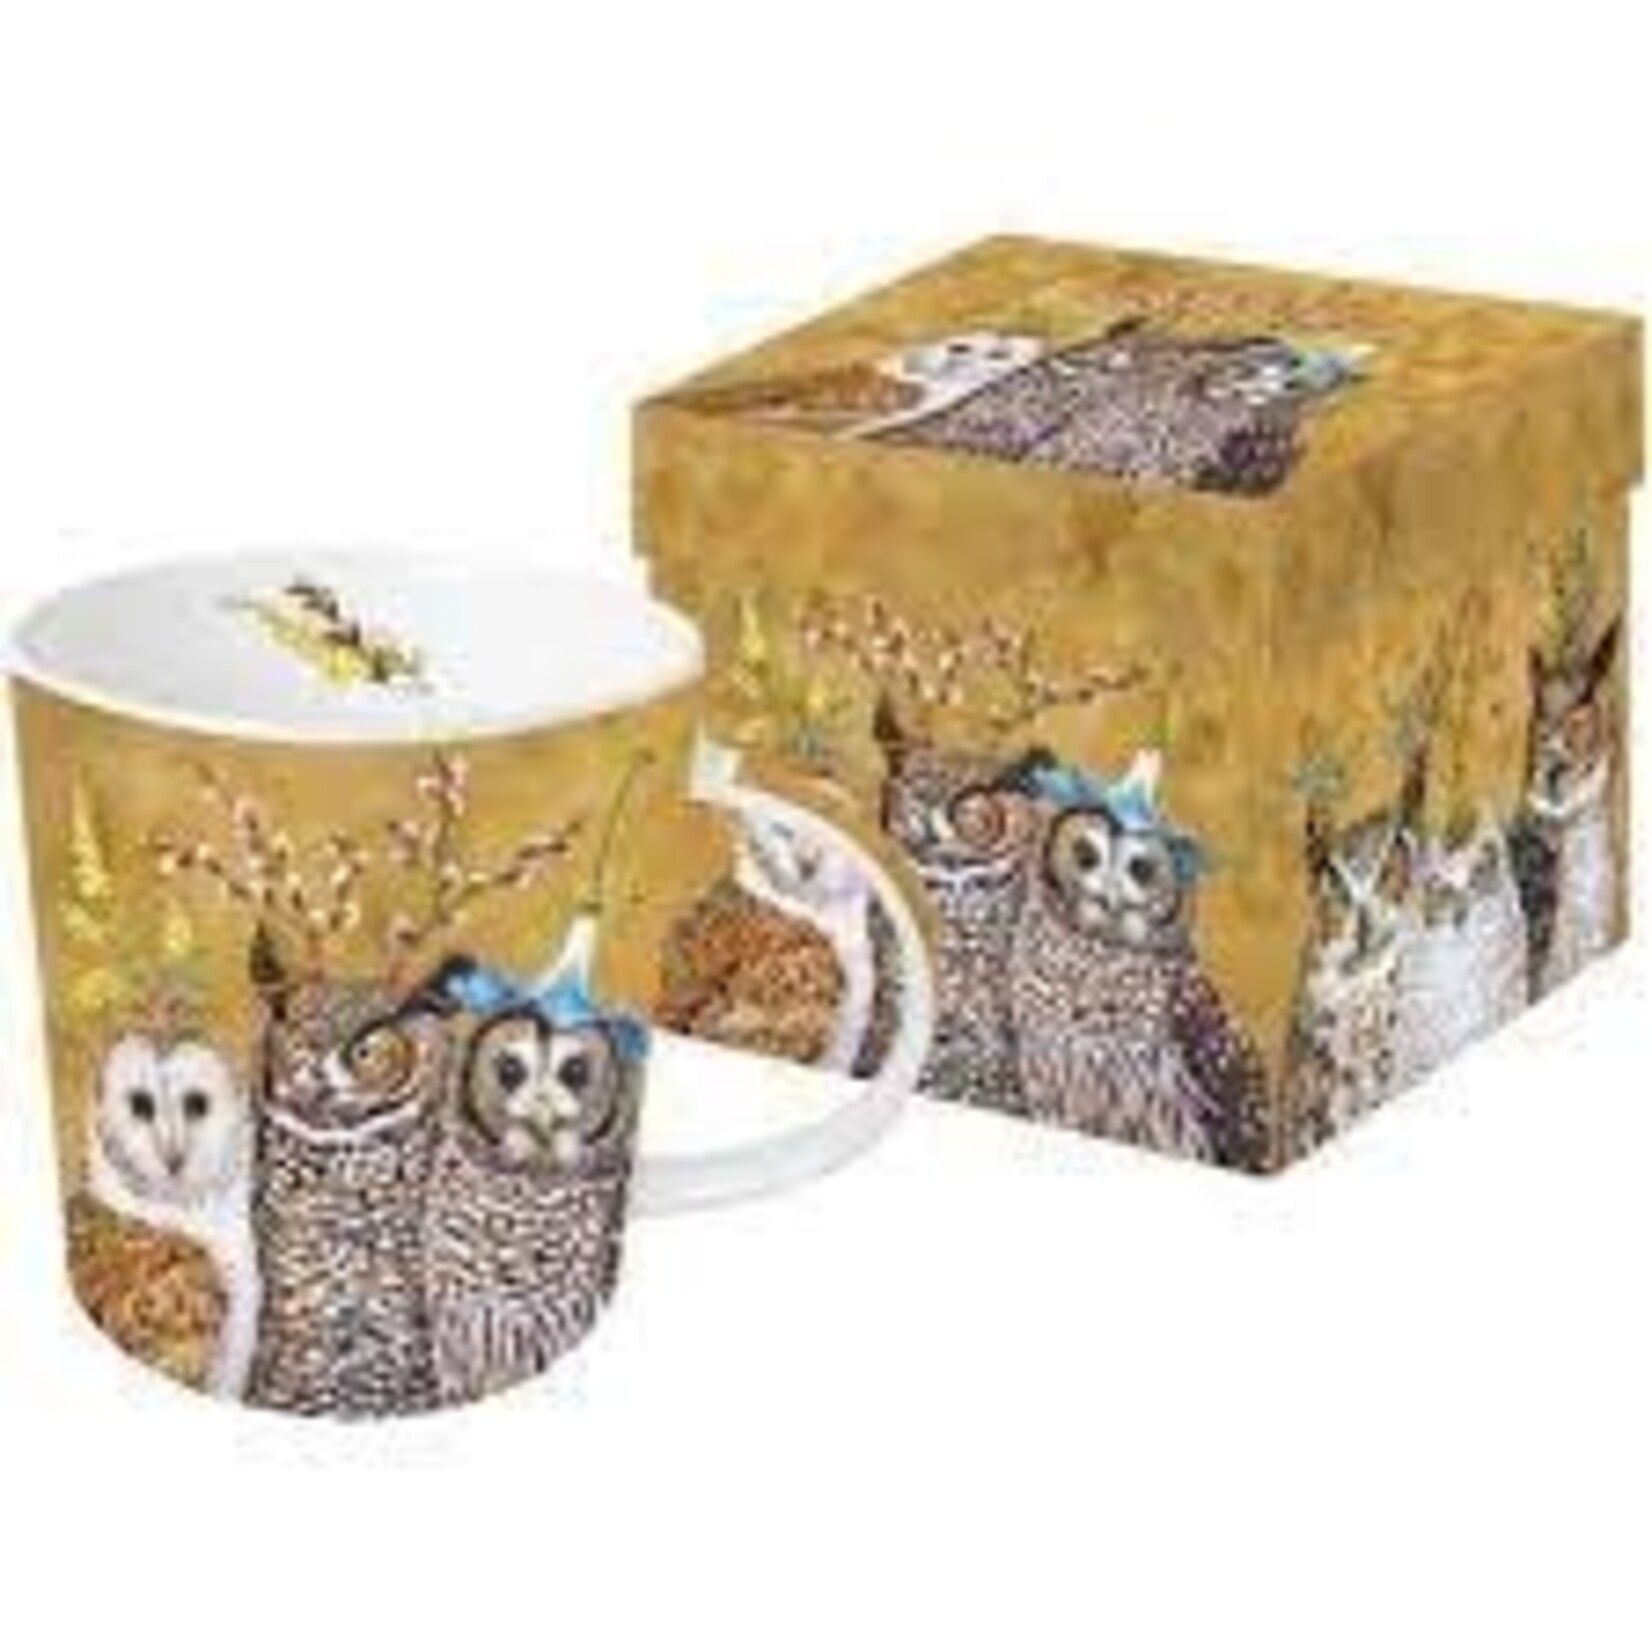 PAPER PRODUCTS DESIGN PPD Mug in Gift Box - Owl Family